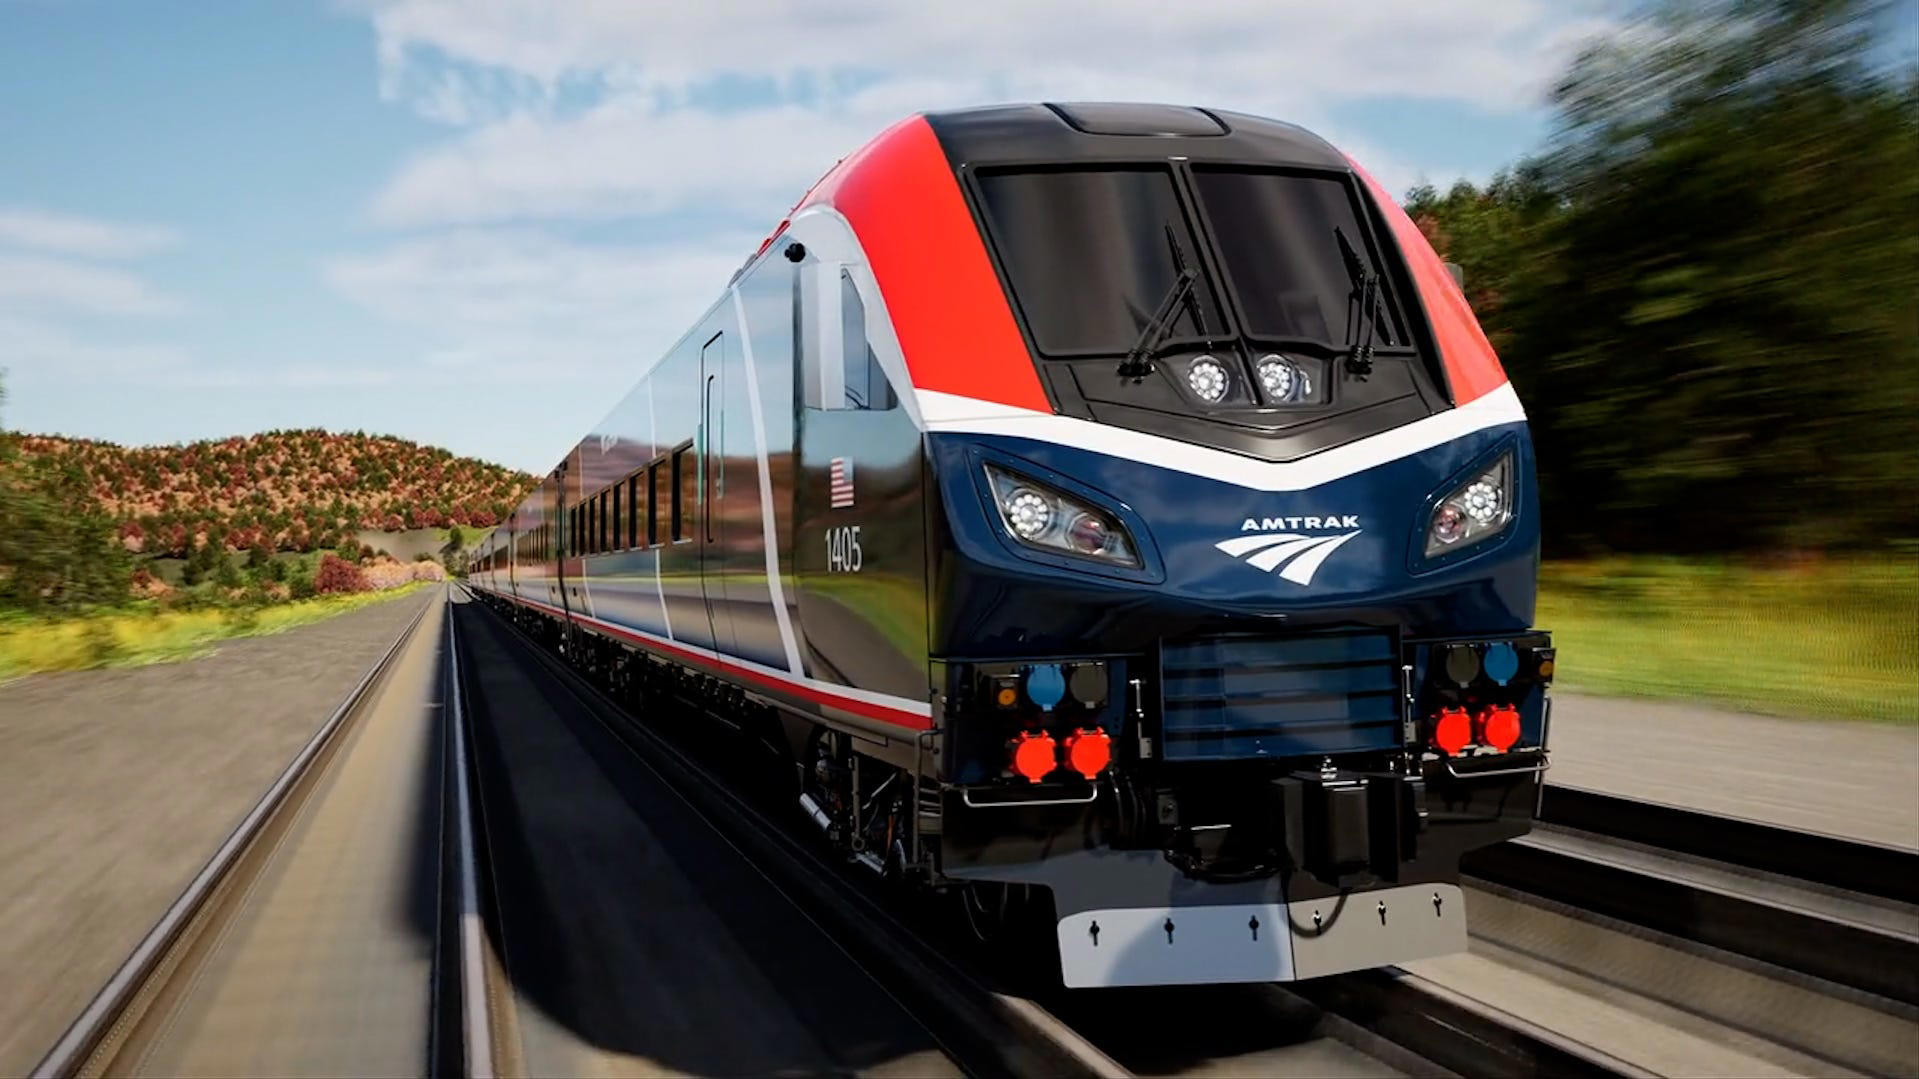 Amtrak's new Airo trains debuting in 2026 will be faster, more sustainable